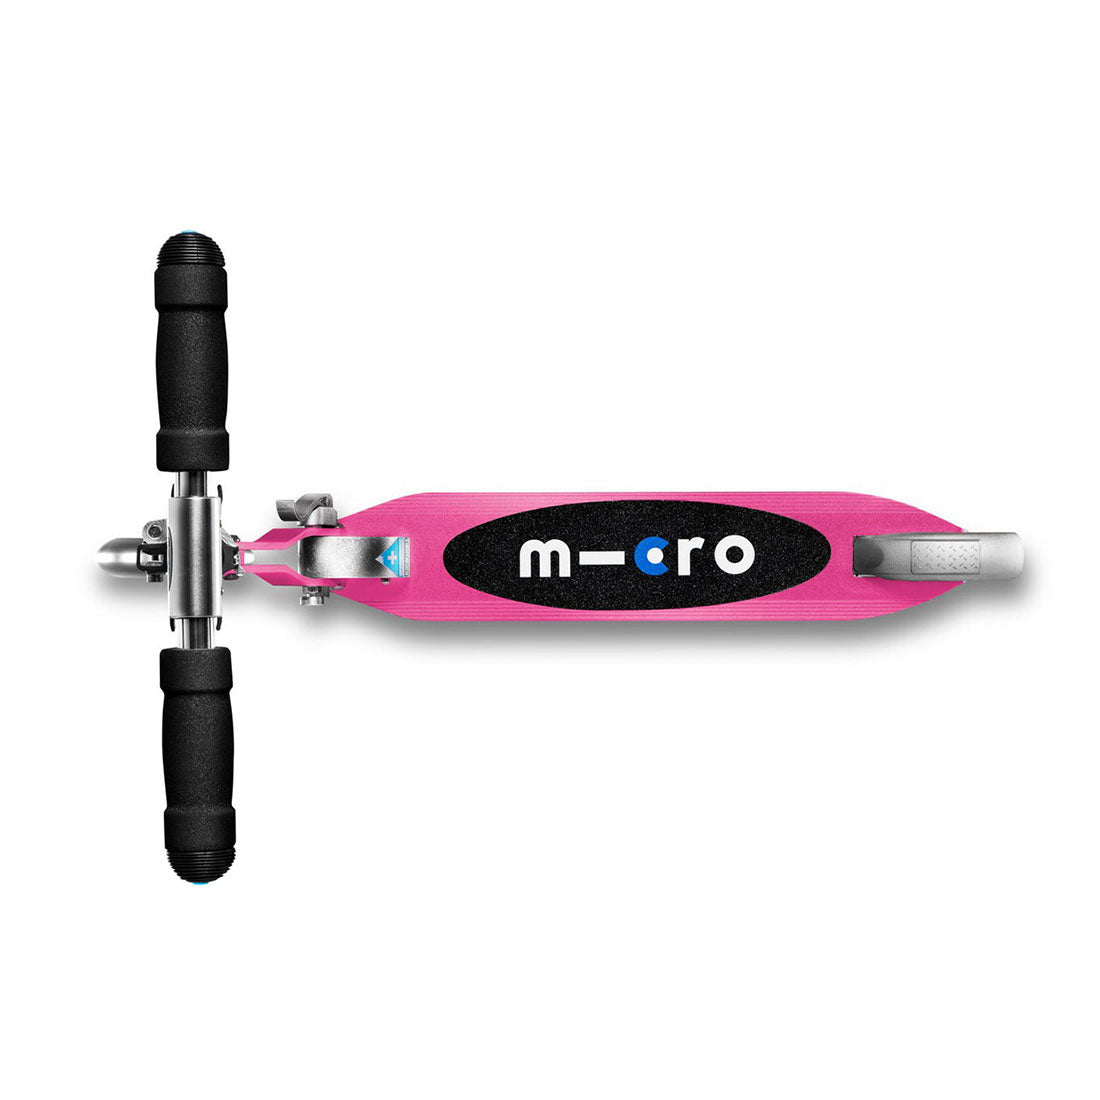 Micro Sprite LED Scooter - Pink Scooter Completes Rec